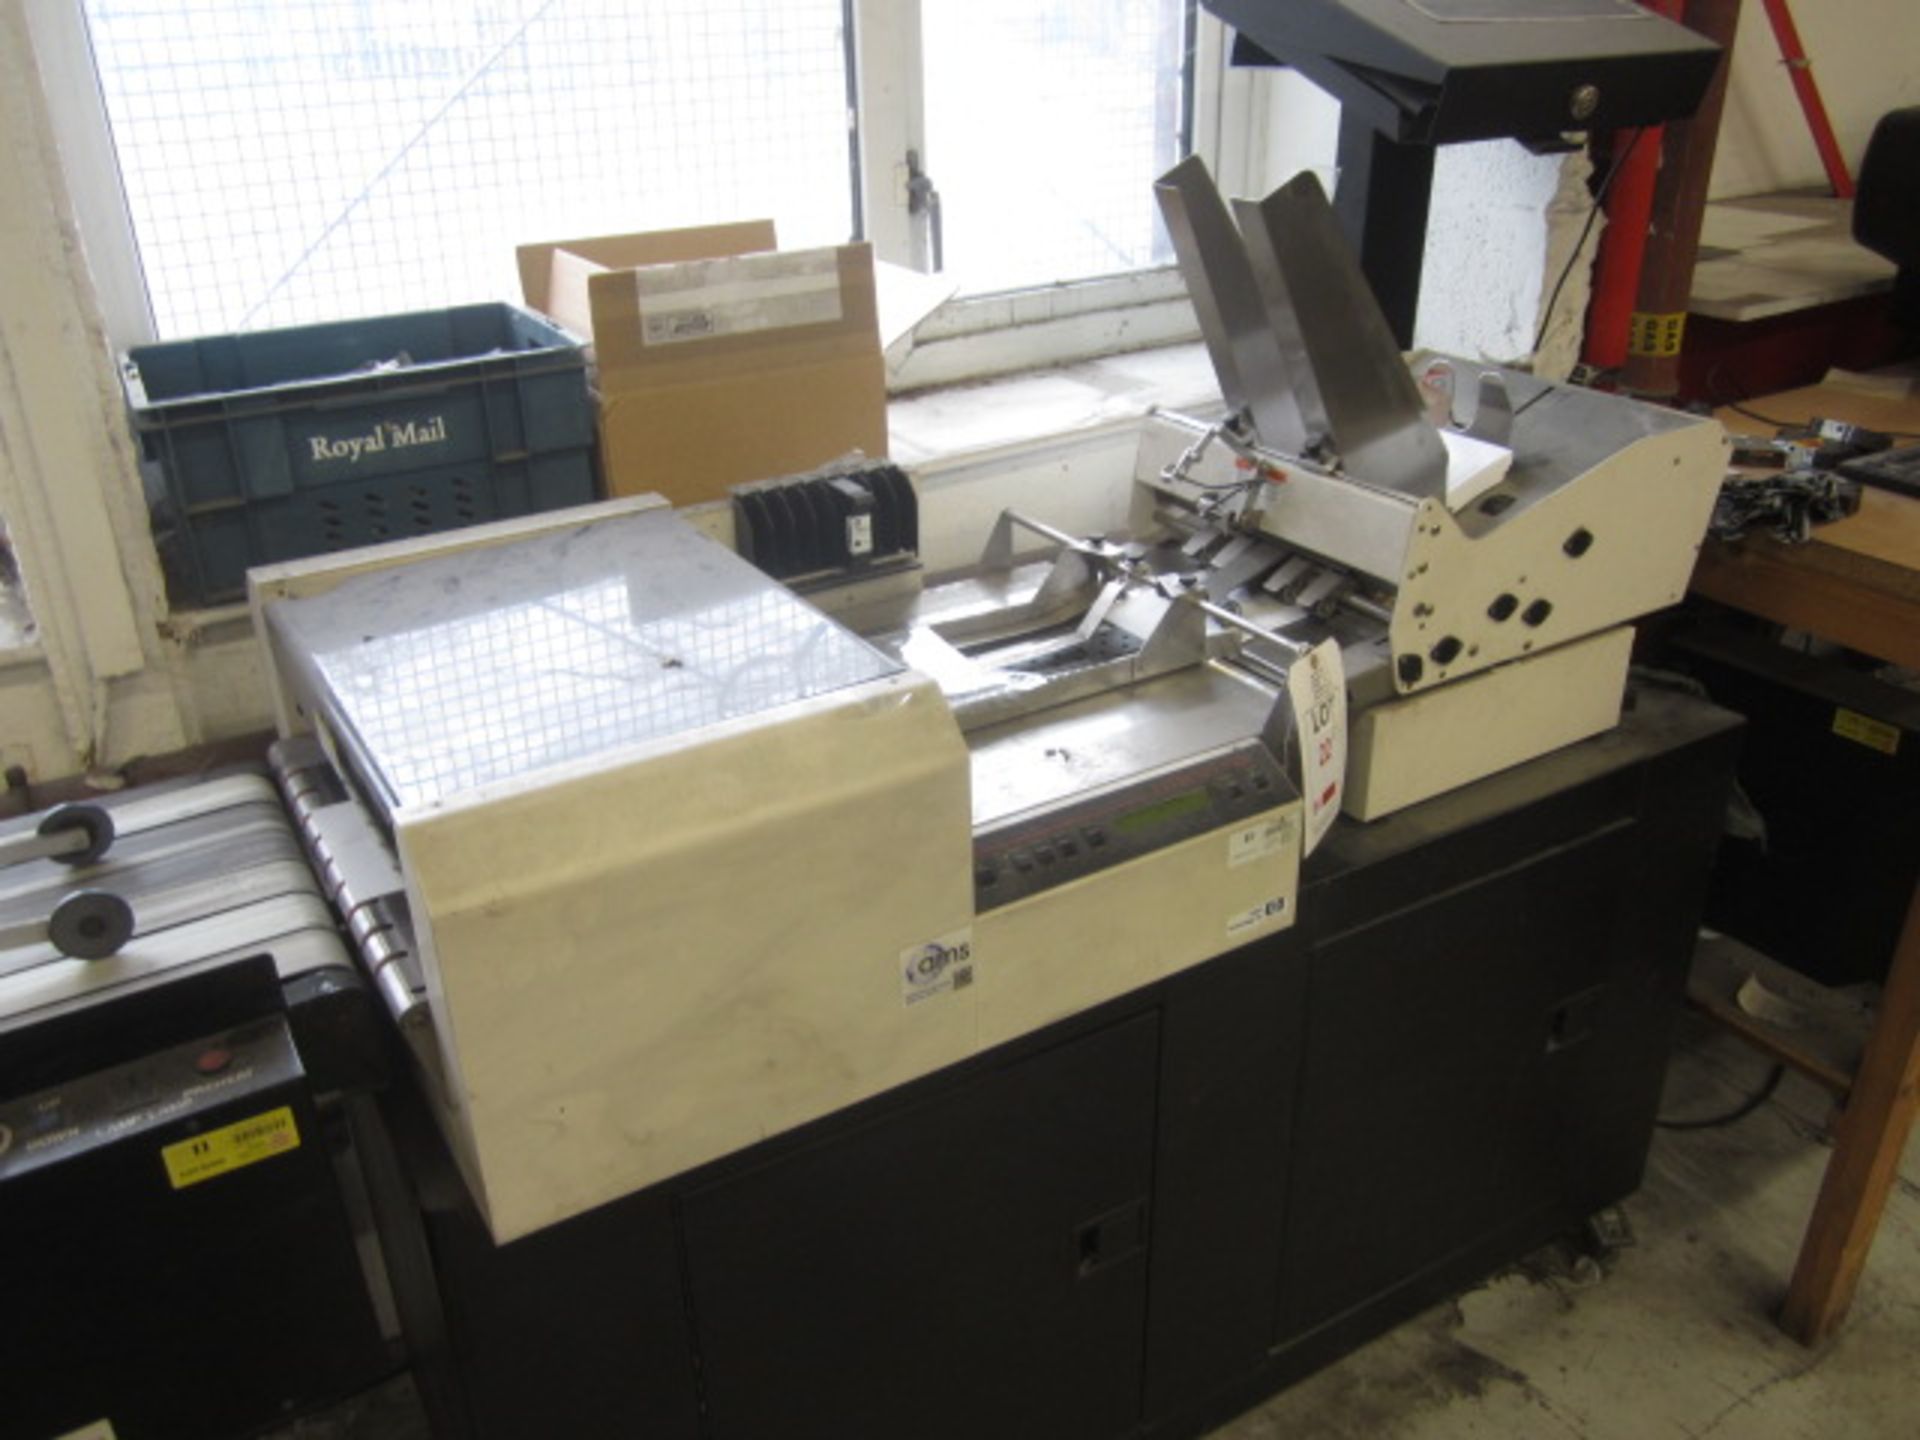 Astrojet 3800 envelope printer, serial no. DR26-064 (2012), with AMS MHDC 6000-2000, serial no. - Image 3 of 4